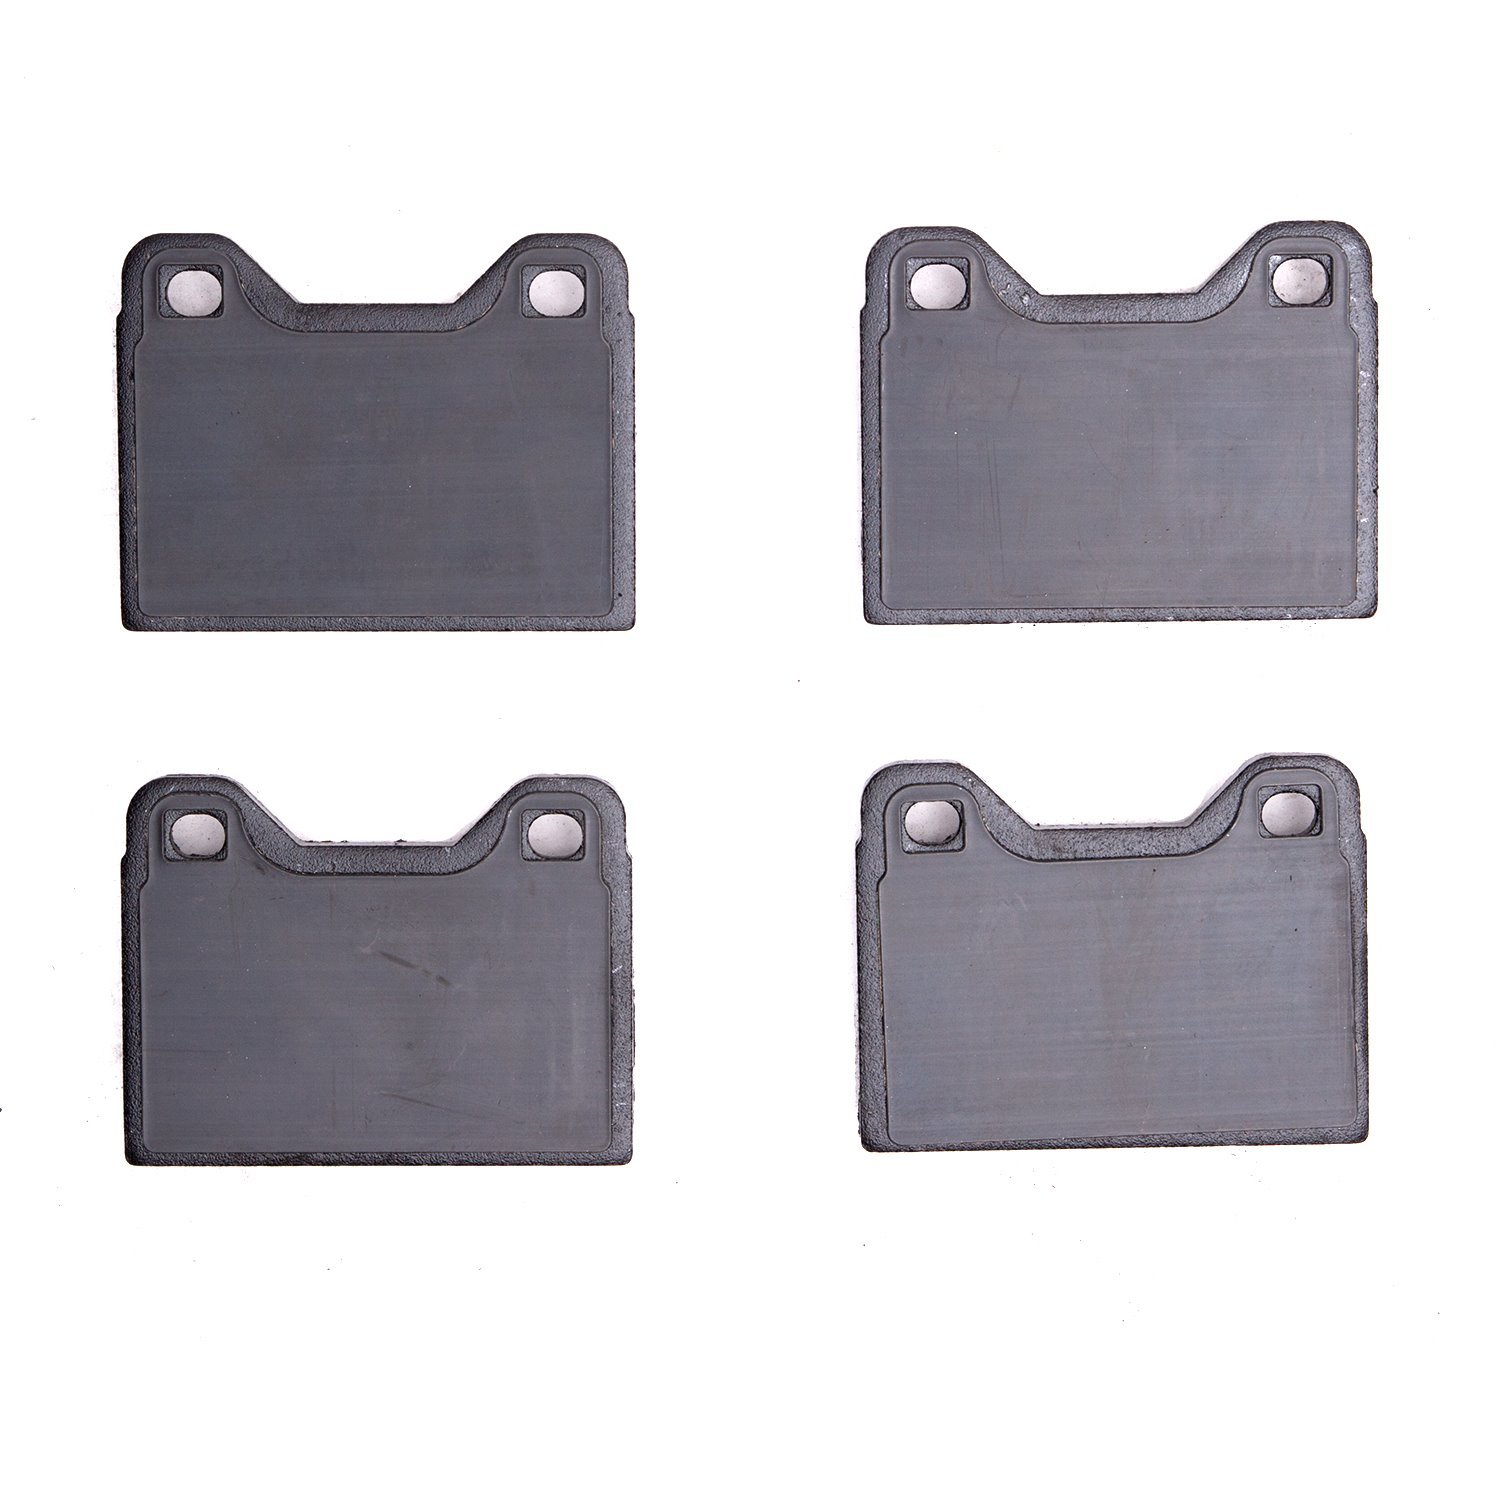 1551-0108-00 5000 Advanced Low-Metallic Brake Pads, 1967-1991 Multiple Makes/Models, Position: Front,Rear